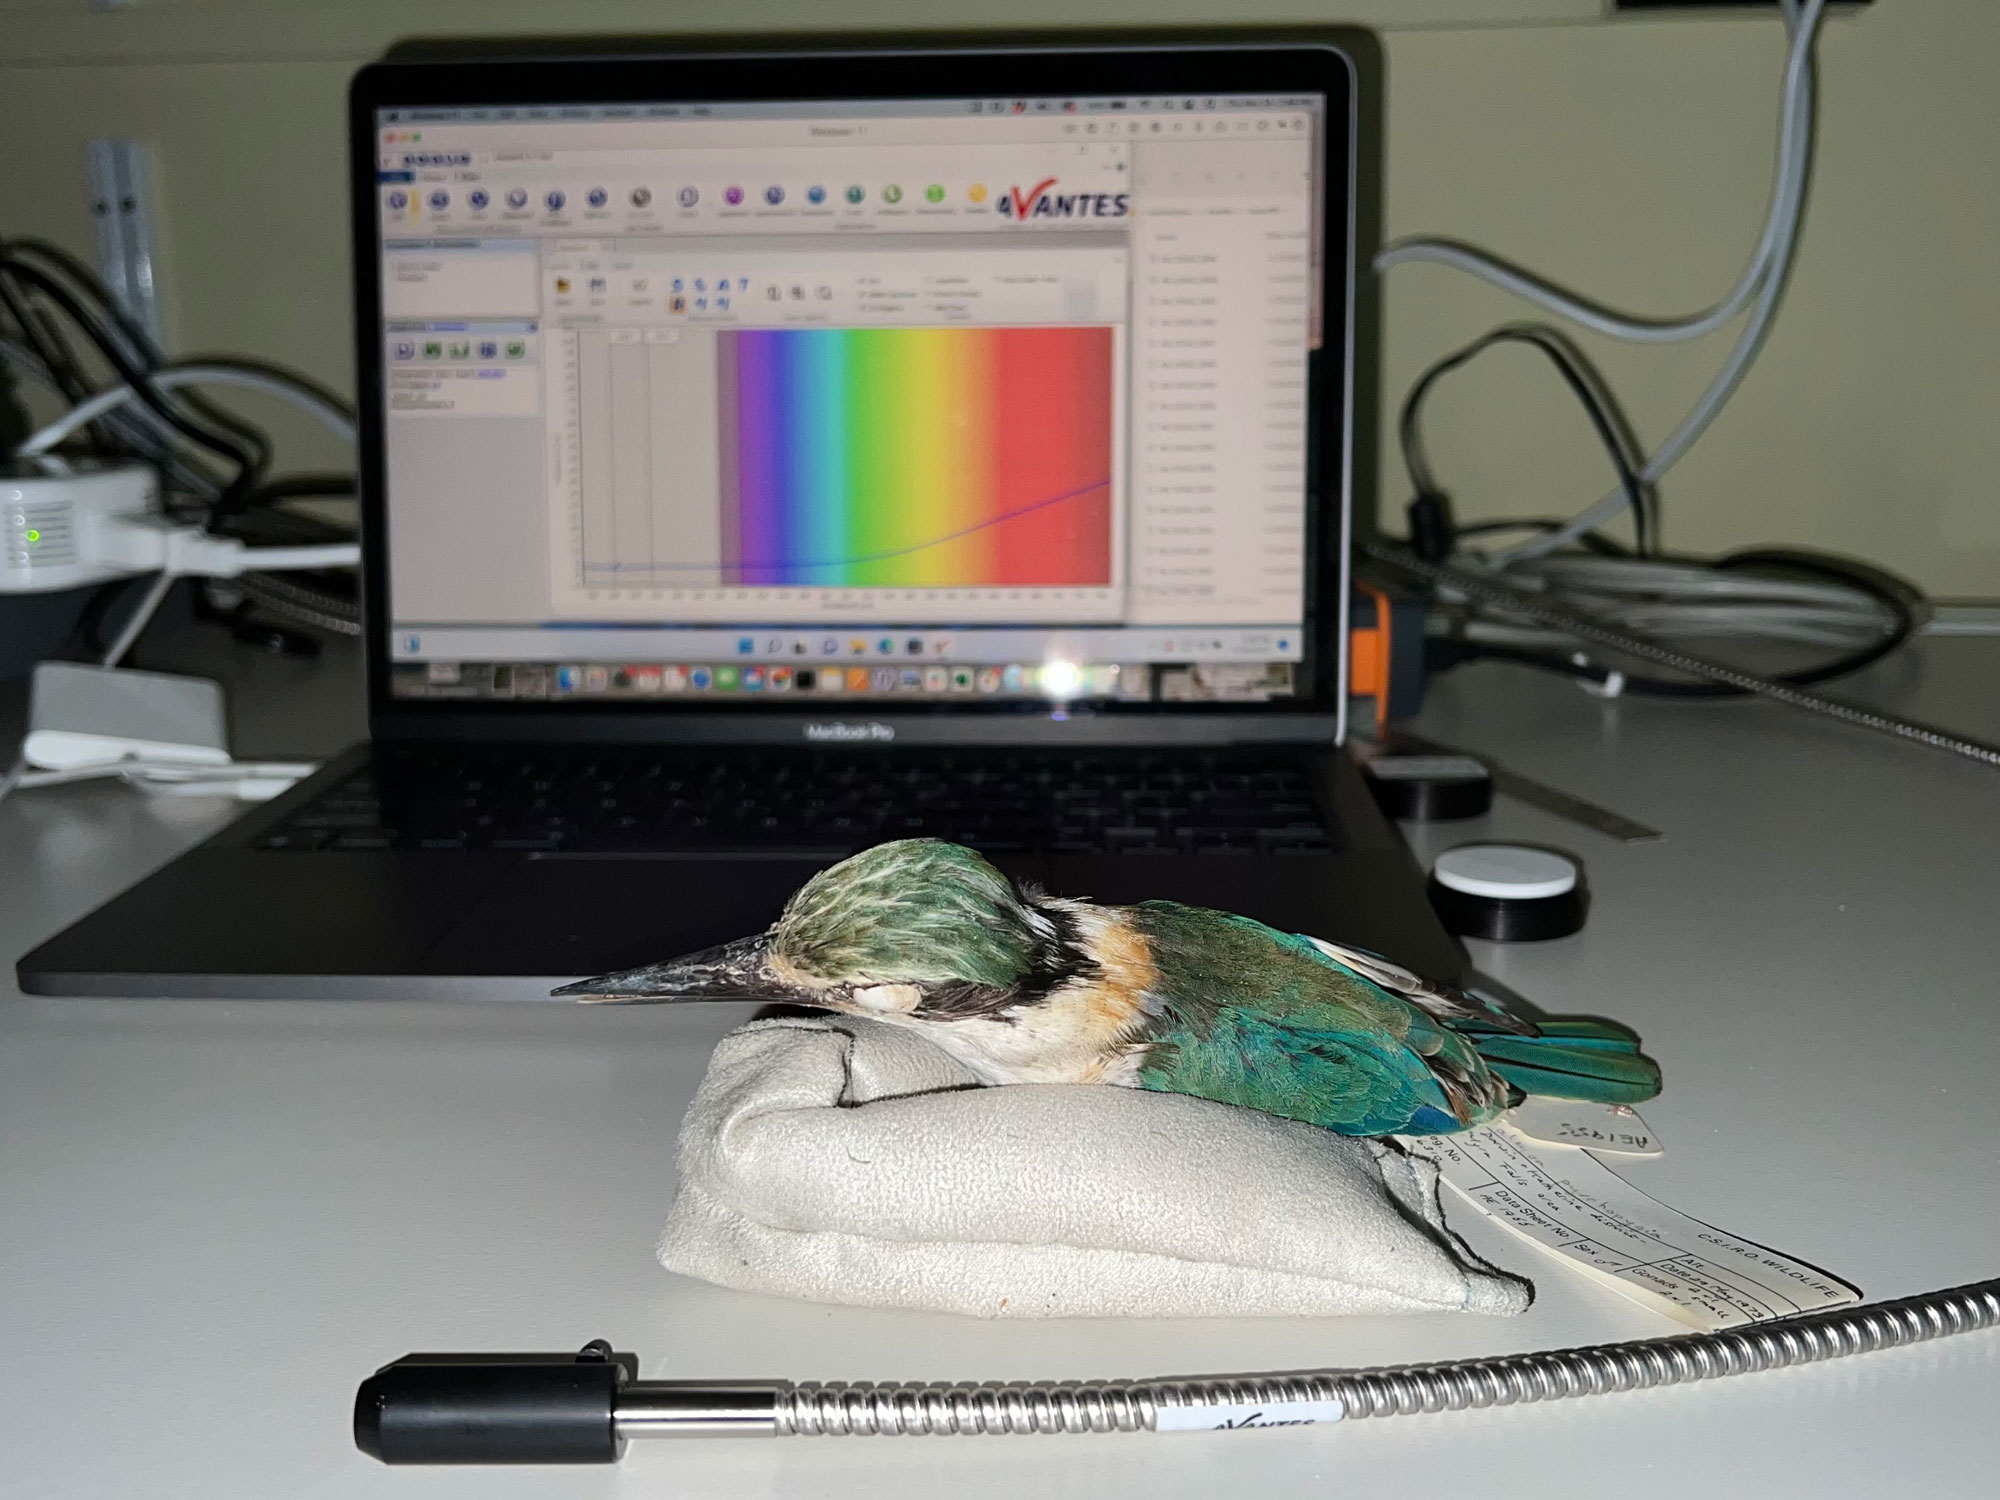 A museum specimen of a red-backed kingfisher sitting on a small beanbag or sandbag for support. The specimen has cotton stuffed in its eye sockets and paper tags attached to it. In front of the specimen is an analytical device and behind the specimen is an open laptop with a color gradient on the screen.